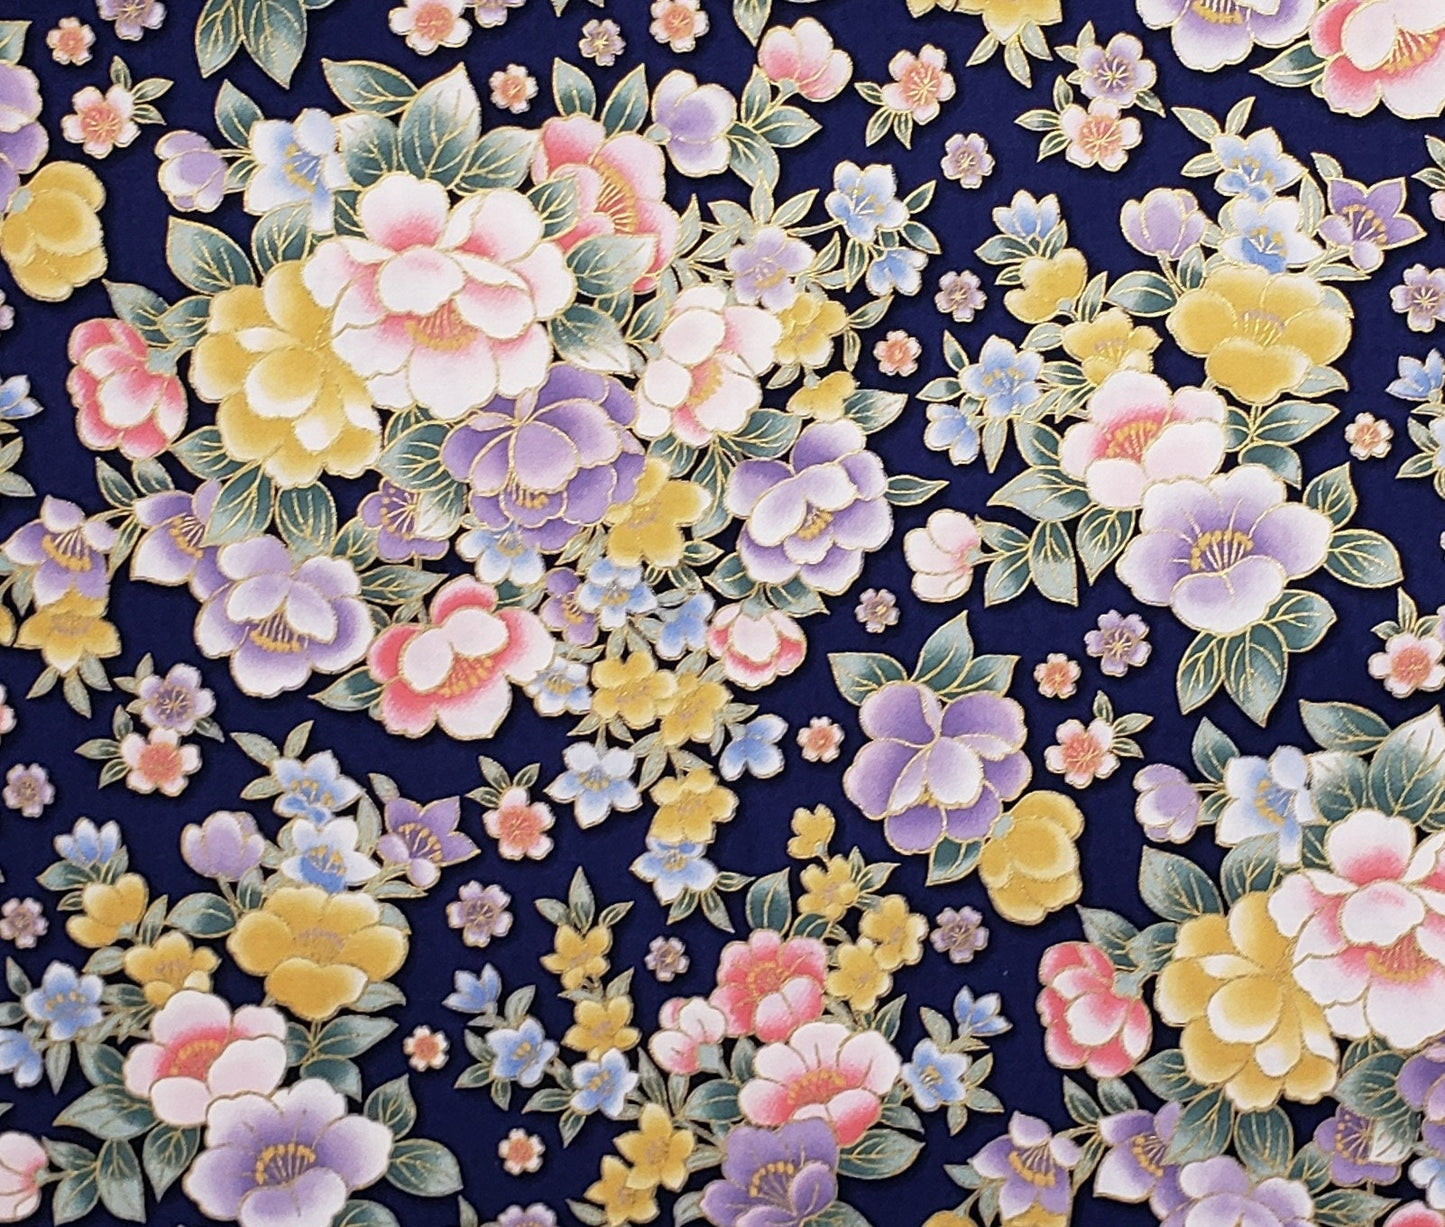 Screen Print D#6983 - Pastel Pink, Lavender, Blue, Yellow Flower Print with Gold Metallic Accents on Dark Blue Fabric